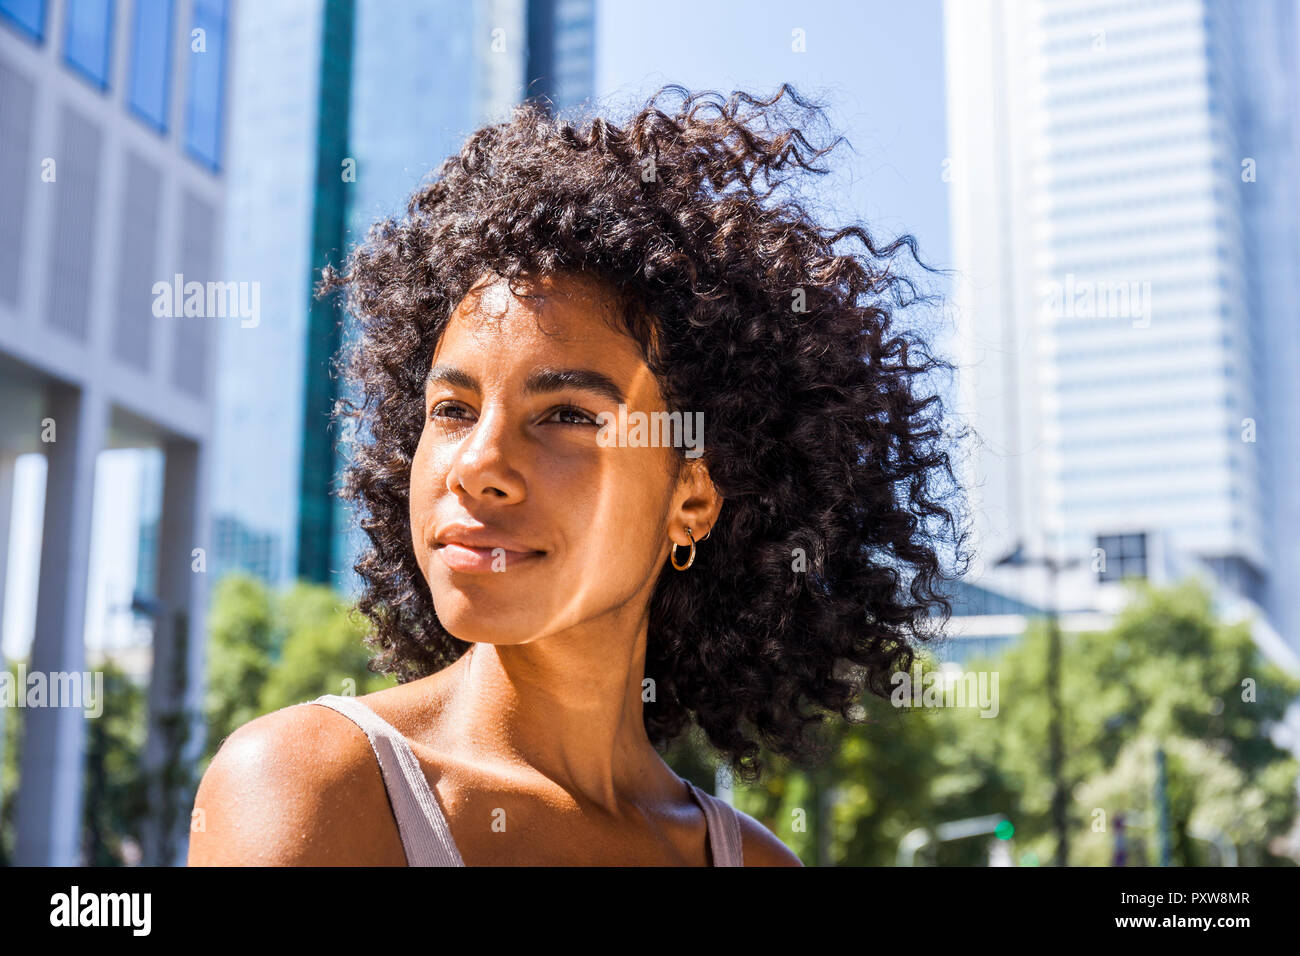 Germany, Frankfurt, portrait of content young woman with curly hair Stock Photo